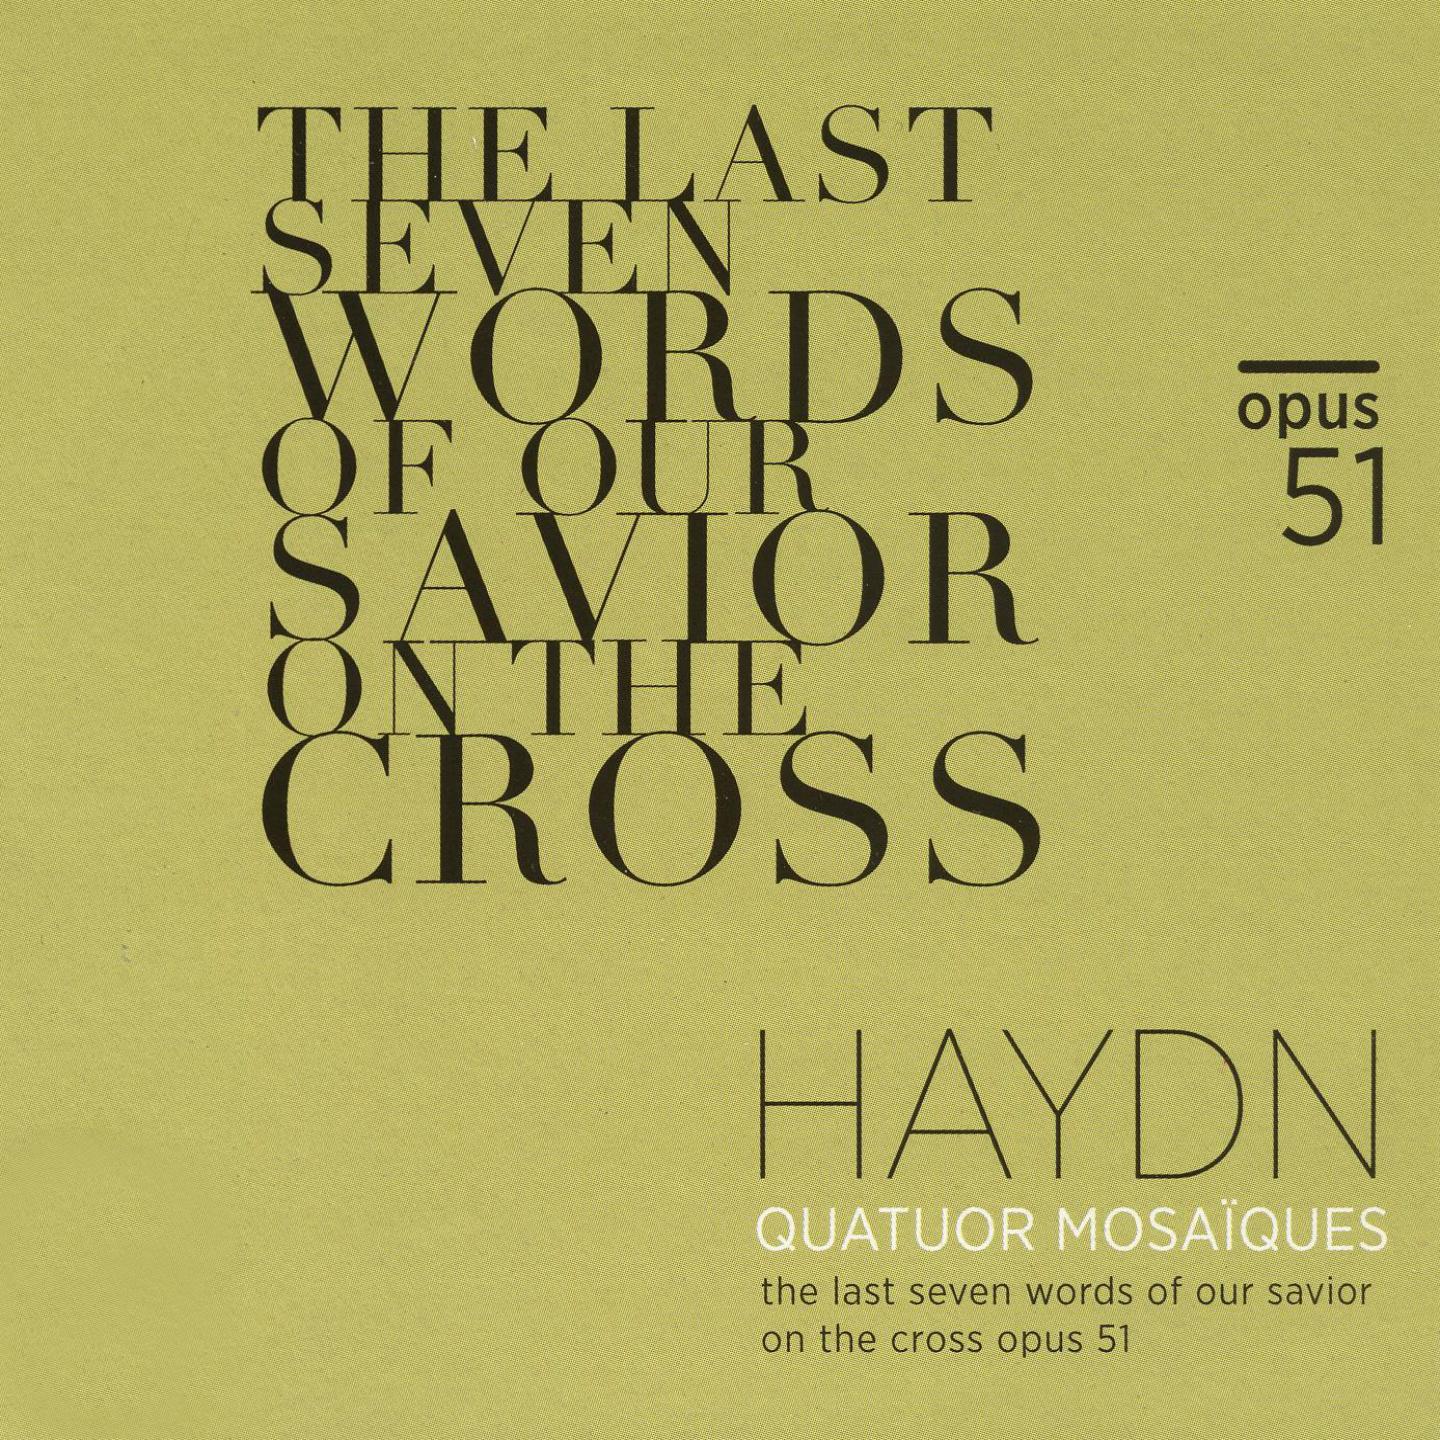 The Seven Last Words of Christ, String Quartets, Op. 51: No. 1, Introduction. Maestoso ed adagio